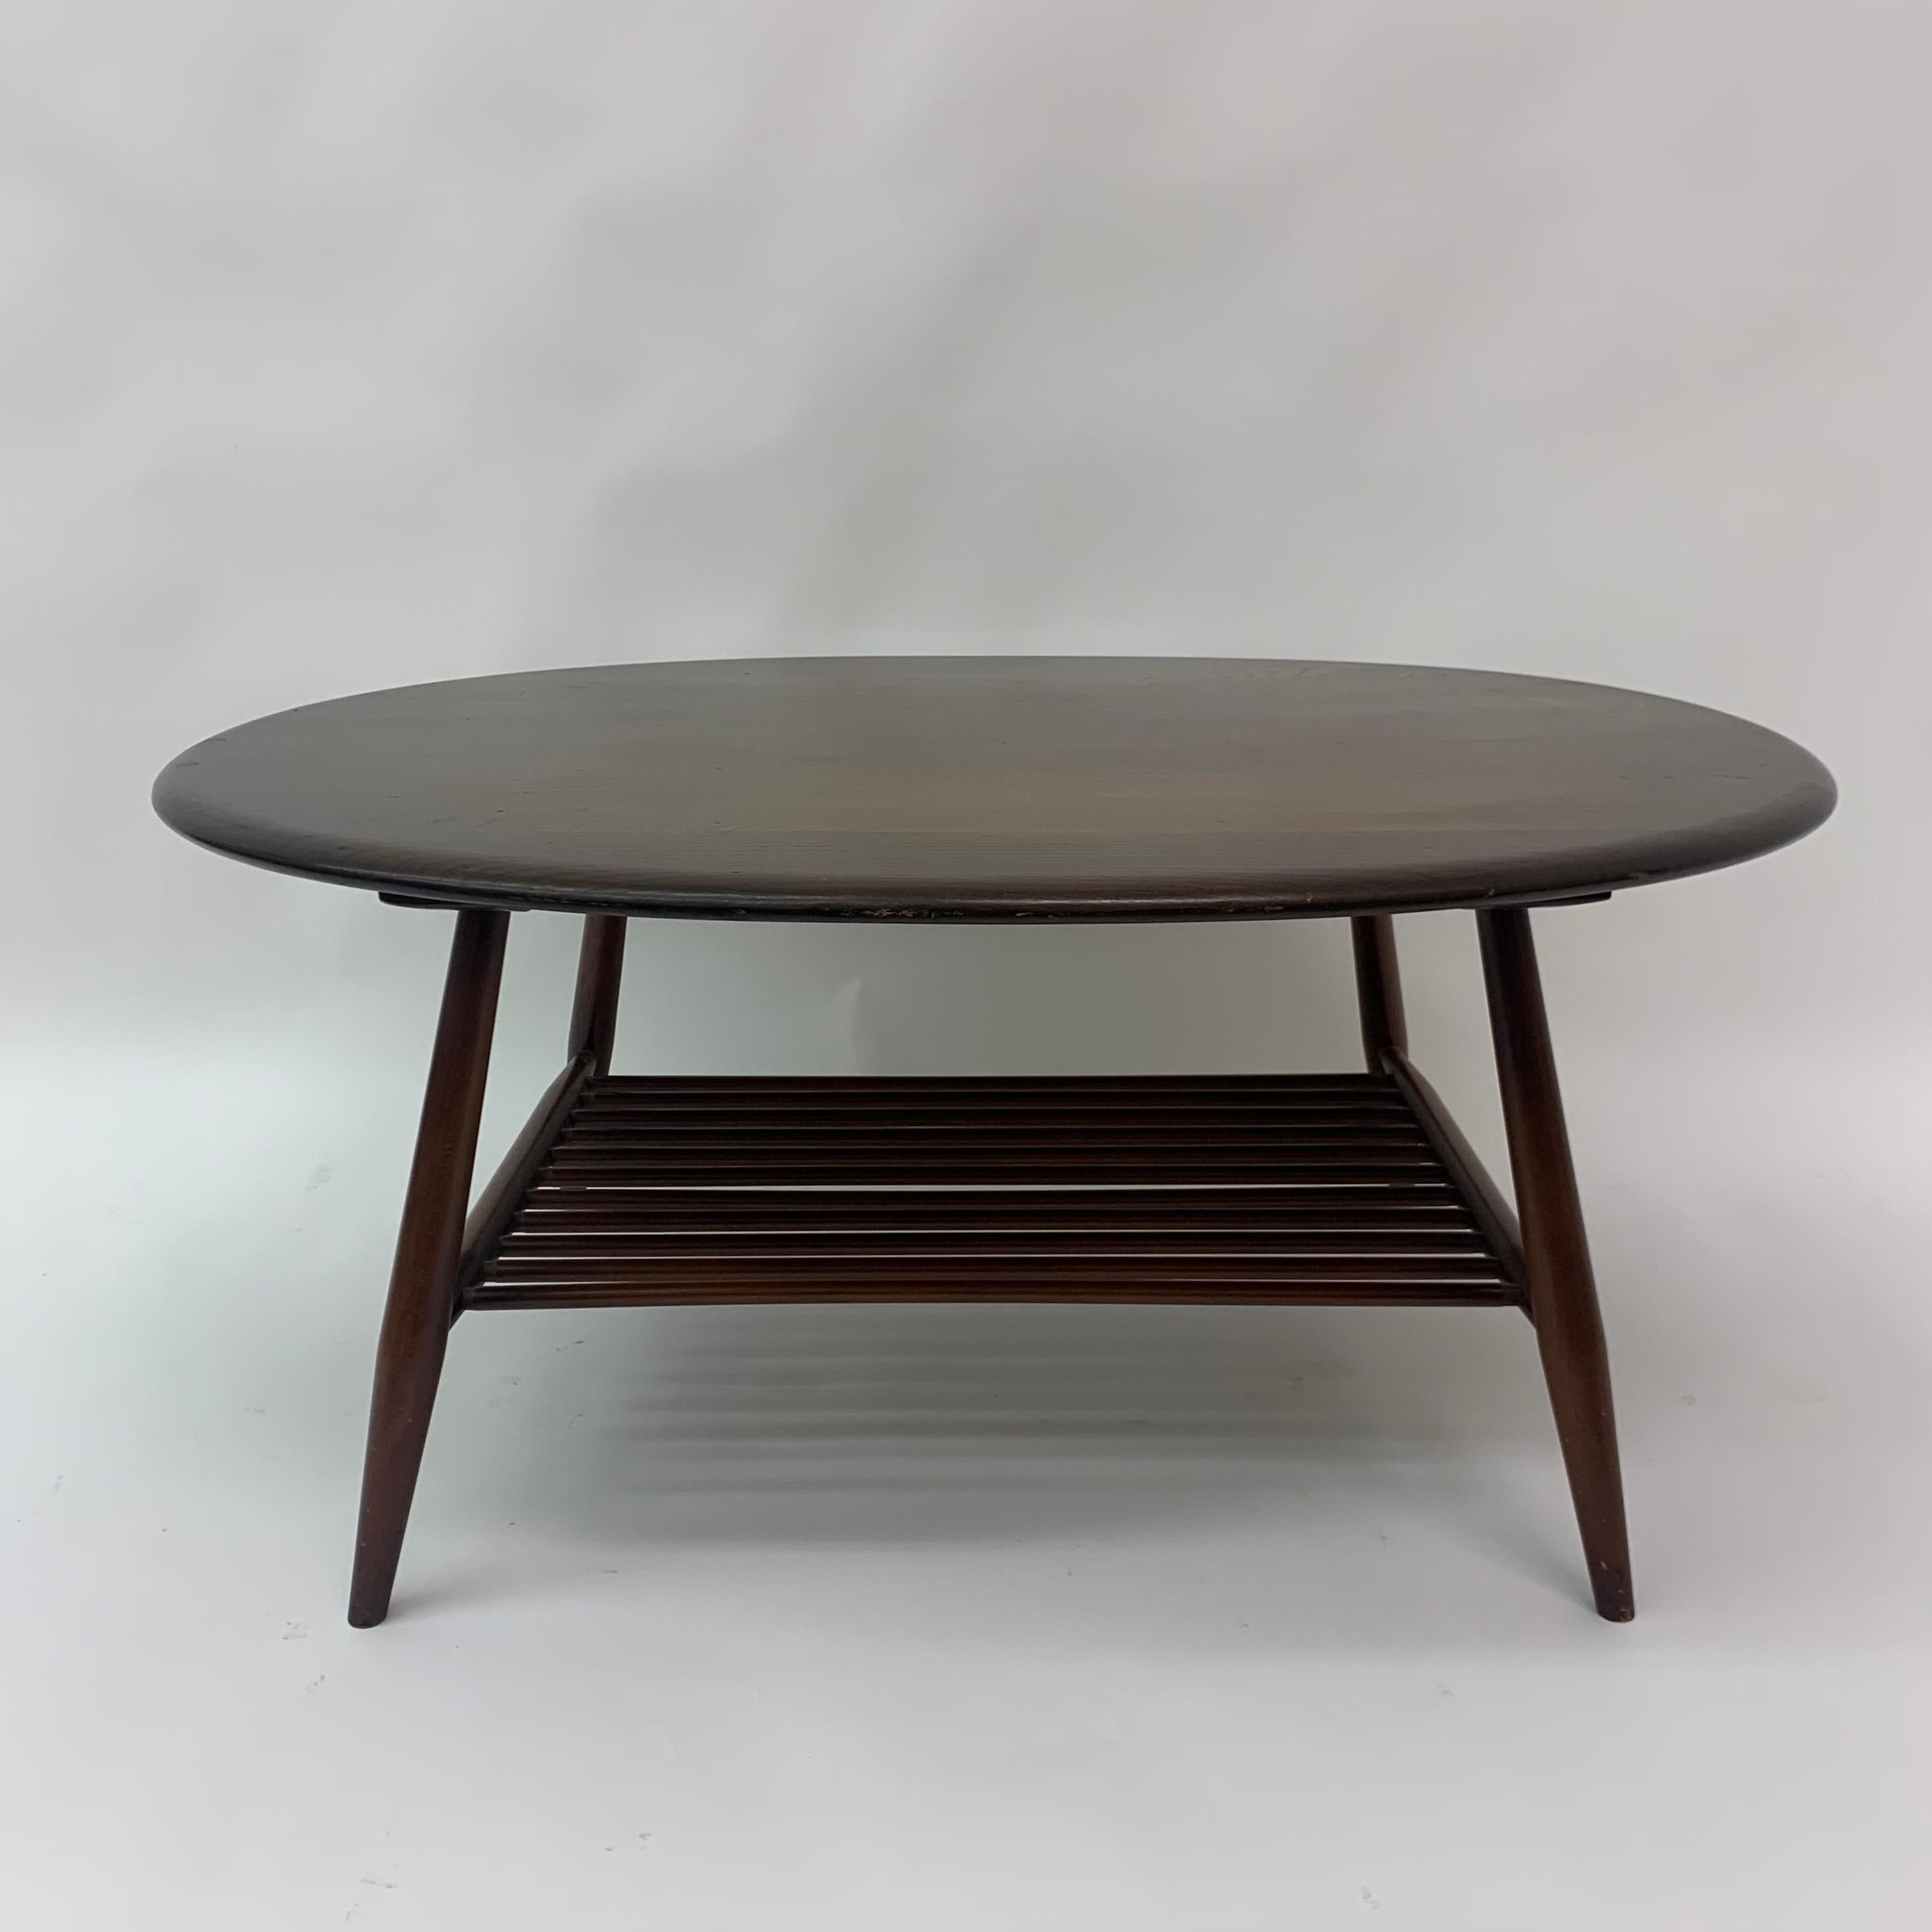 British Large Oval Coffee Table by Lucian Randolph Ercolani for Ercol, England, 1950s